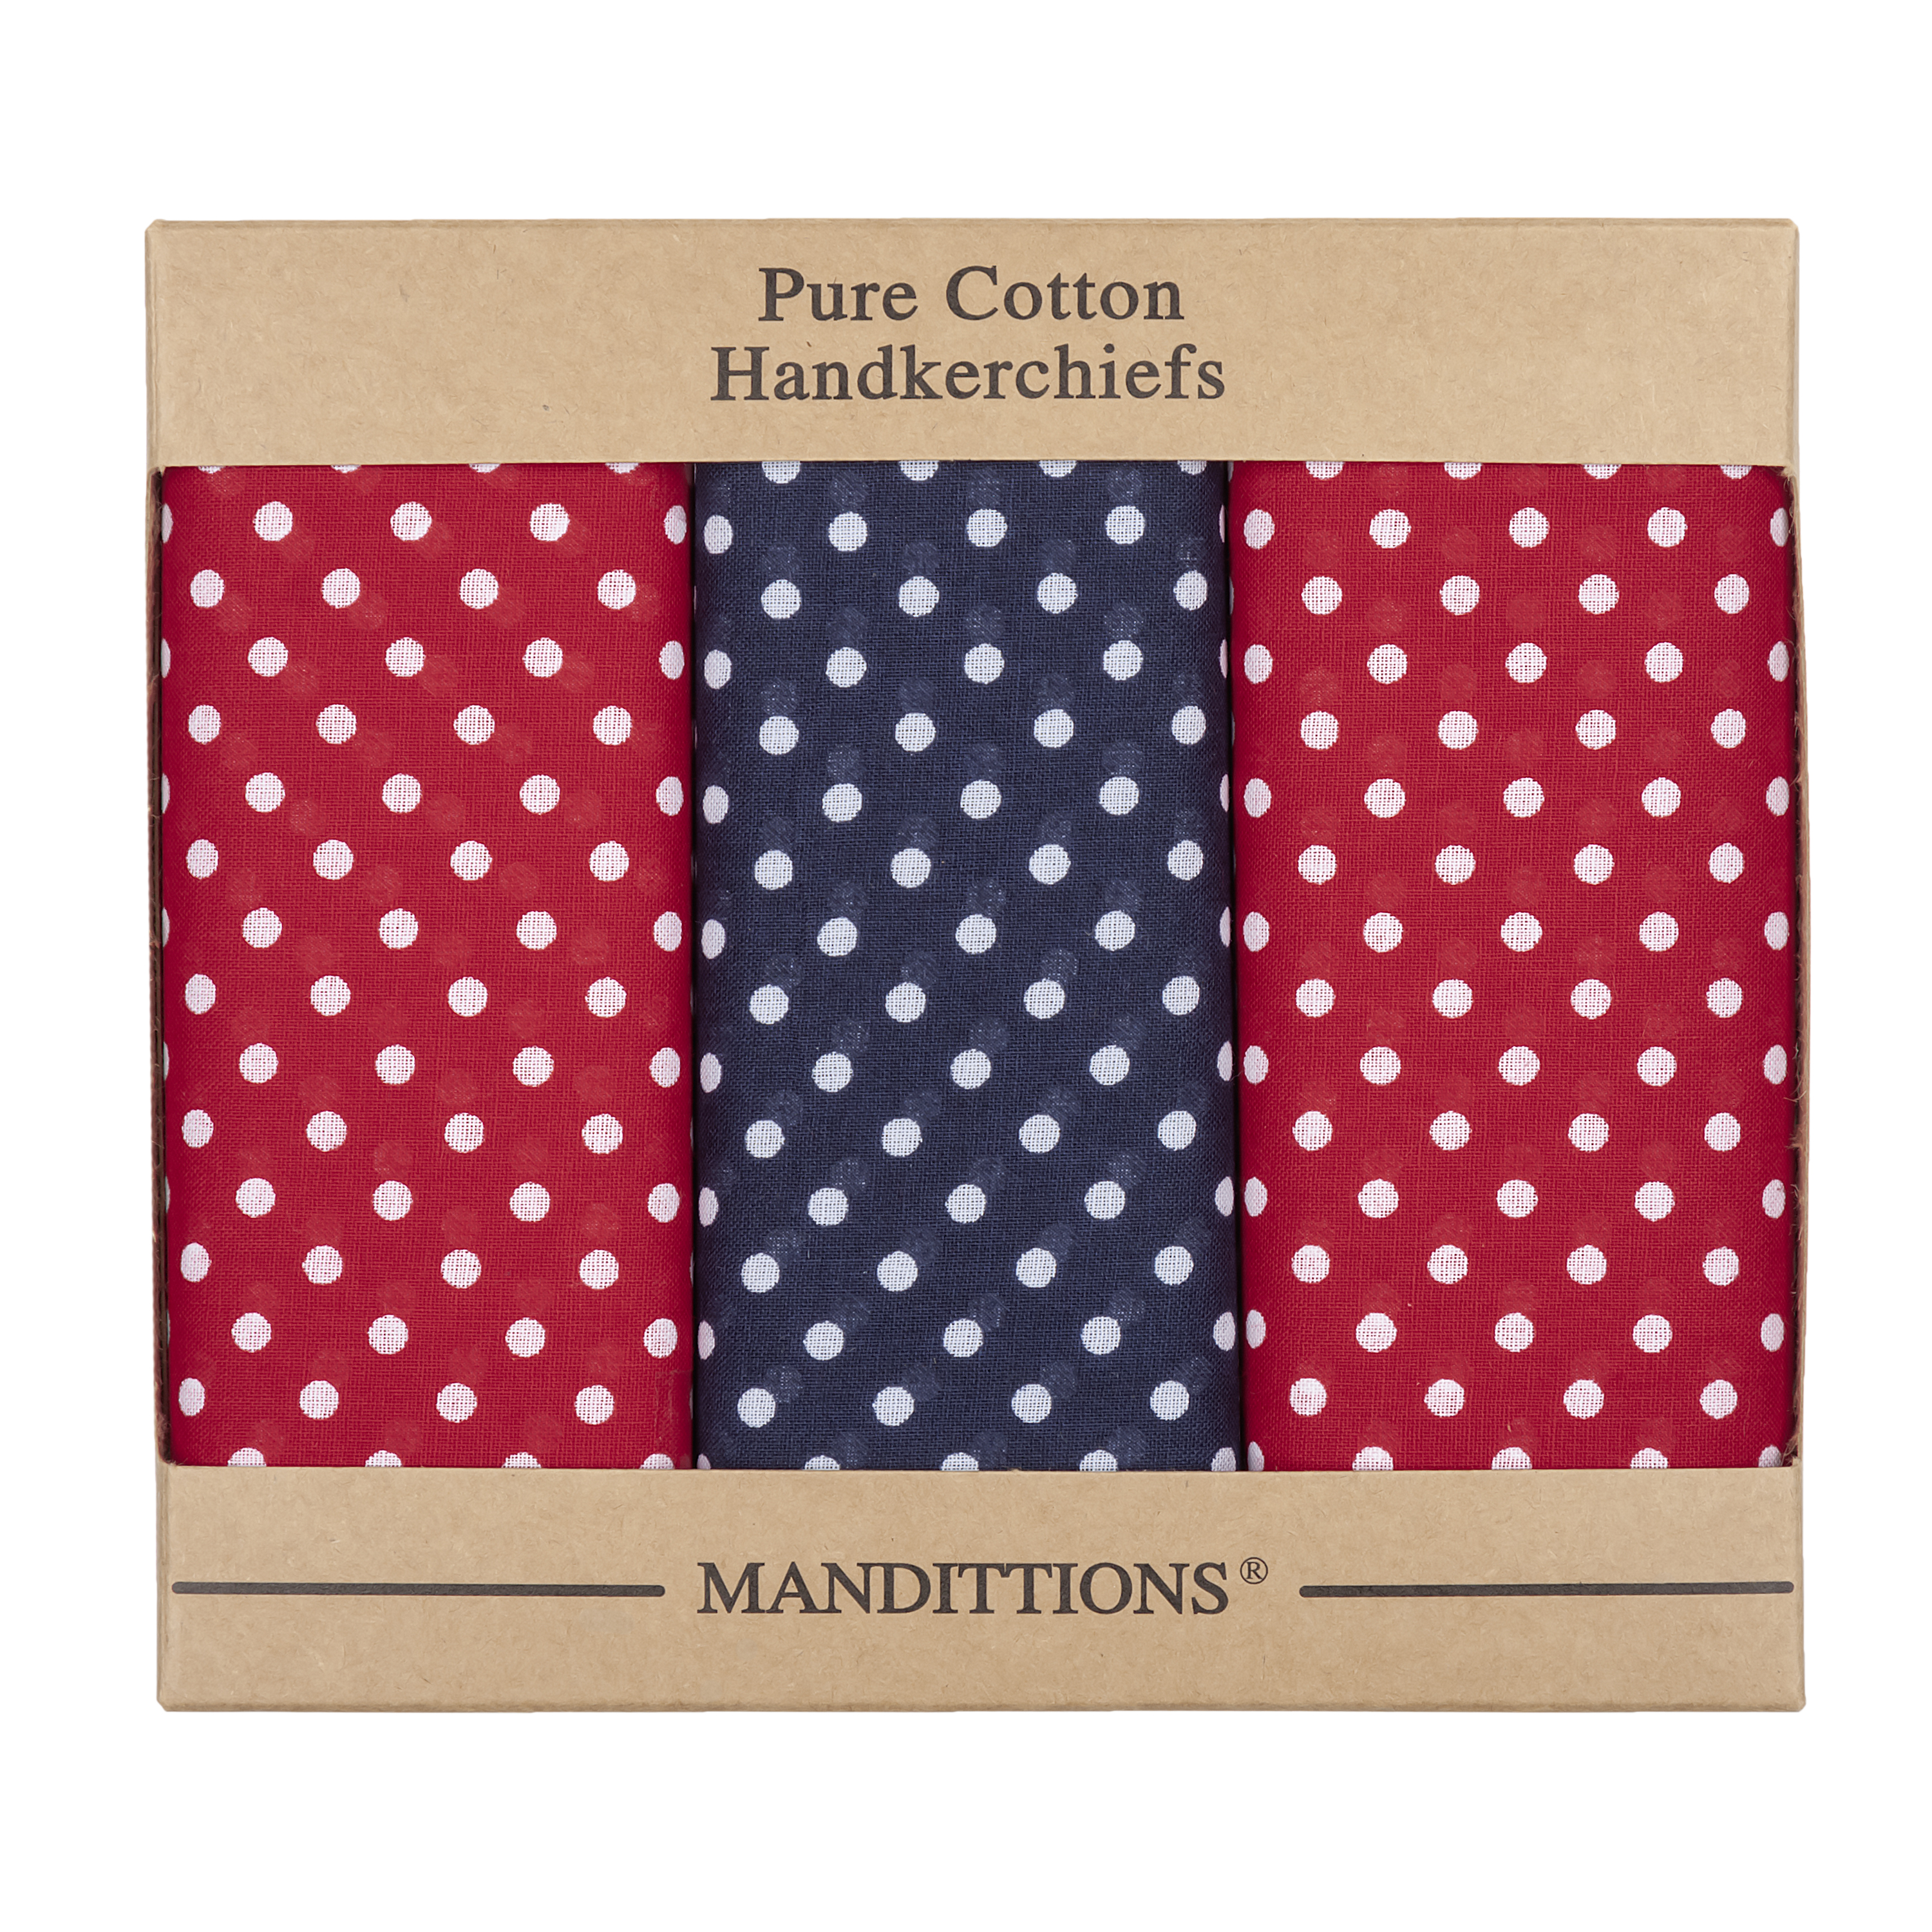 Extra Large Spotted Cotton Handkerchiefs by MANDITTIONS